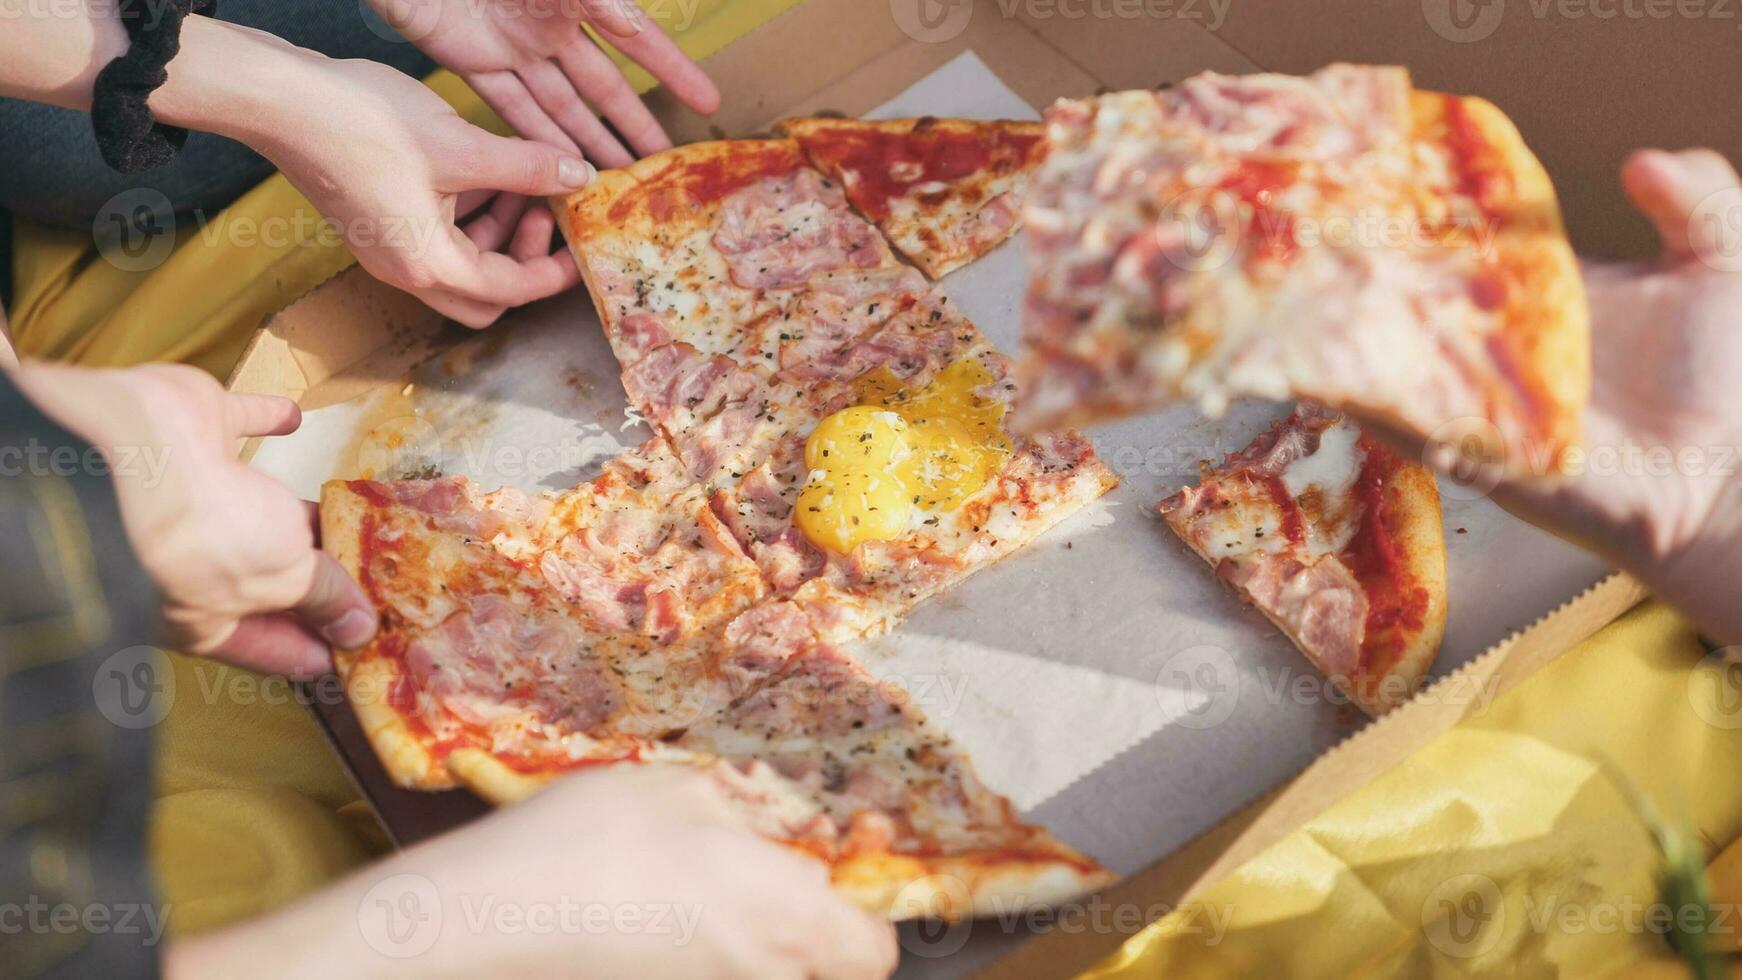 Young students' hands reach for the pizza. photo